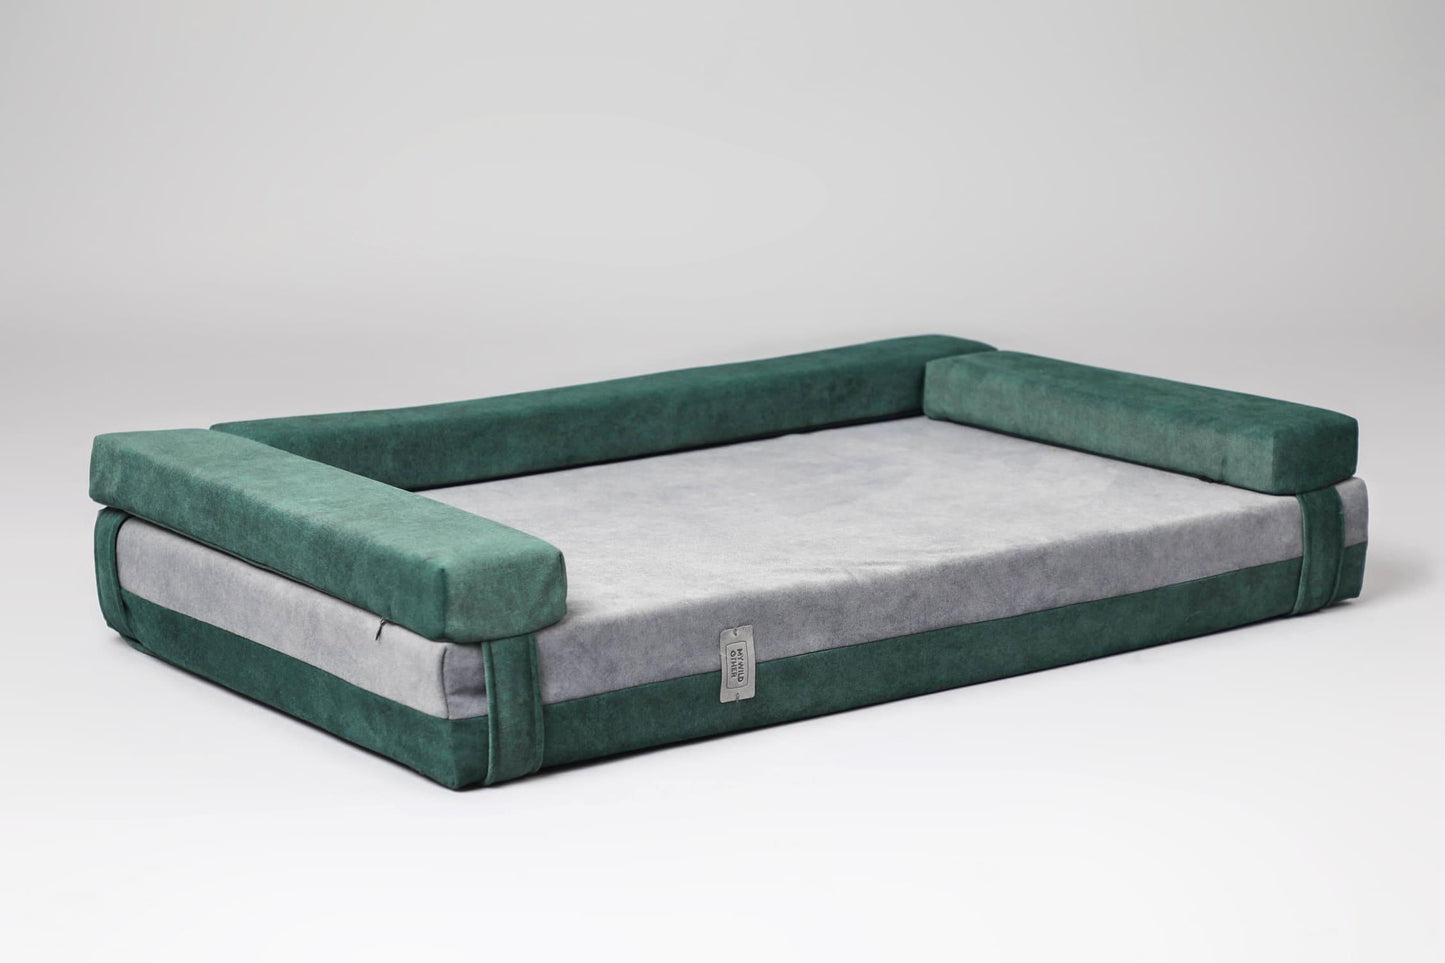 2-sided transformer dog bed. MOSS GREEN+STEEL GREY - European handmade dog accessories by My Wild Other